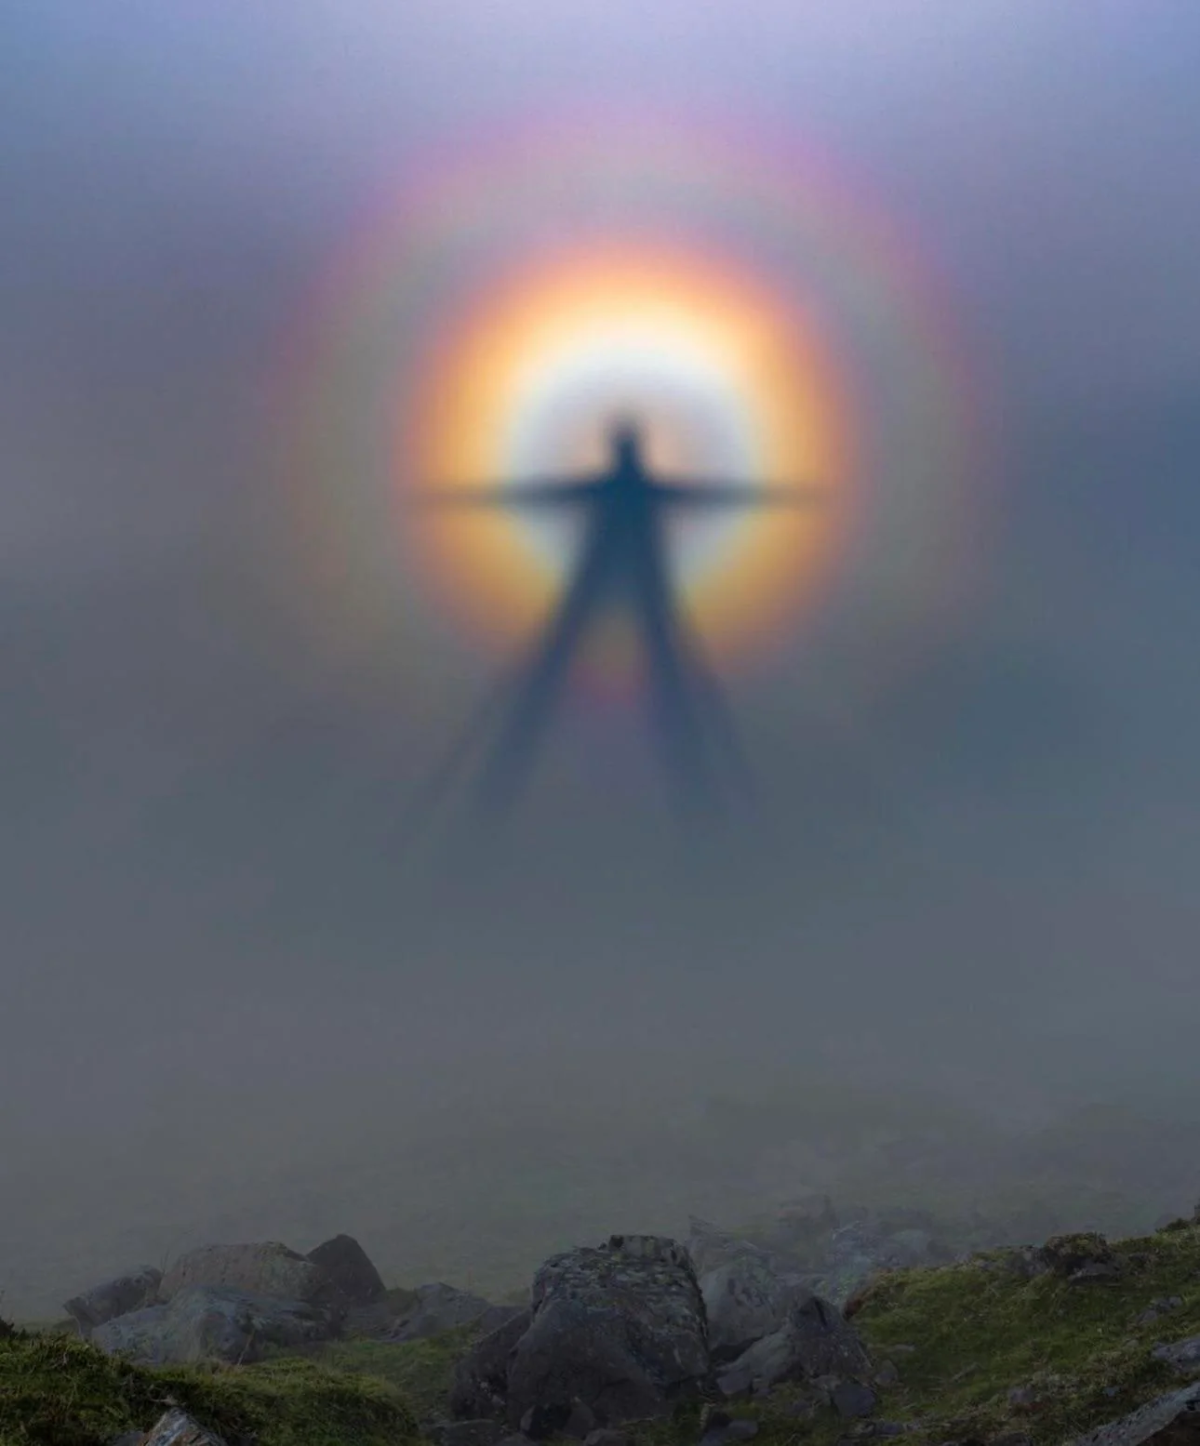 Brocken's spectrum, a mysterious optical phenomenon visible in the mountains